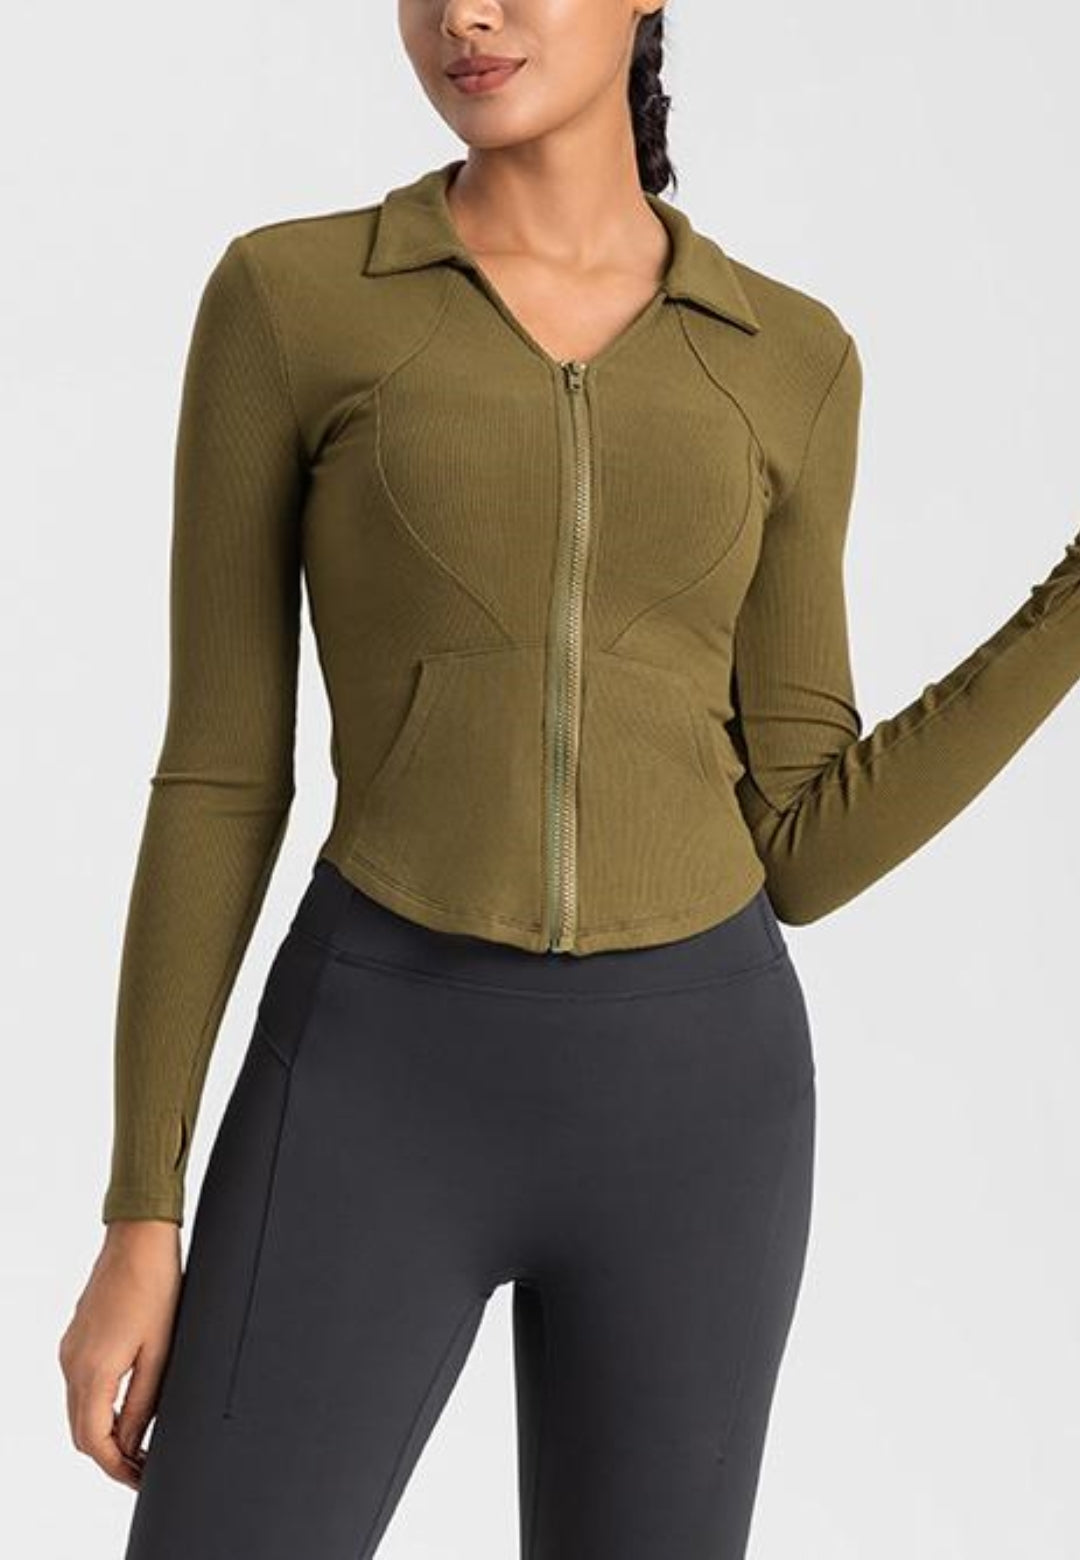 Activewear Jacket for runners